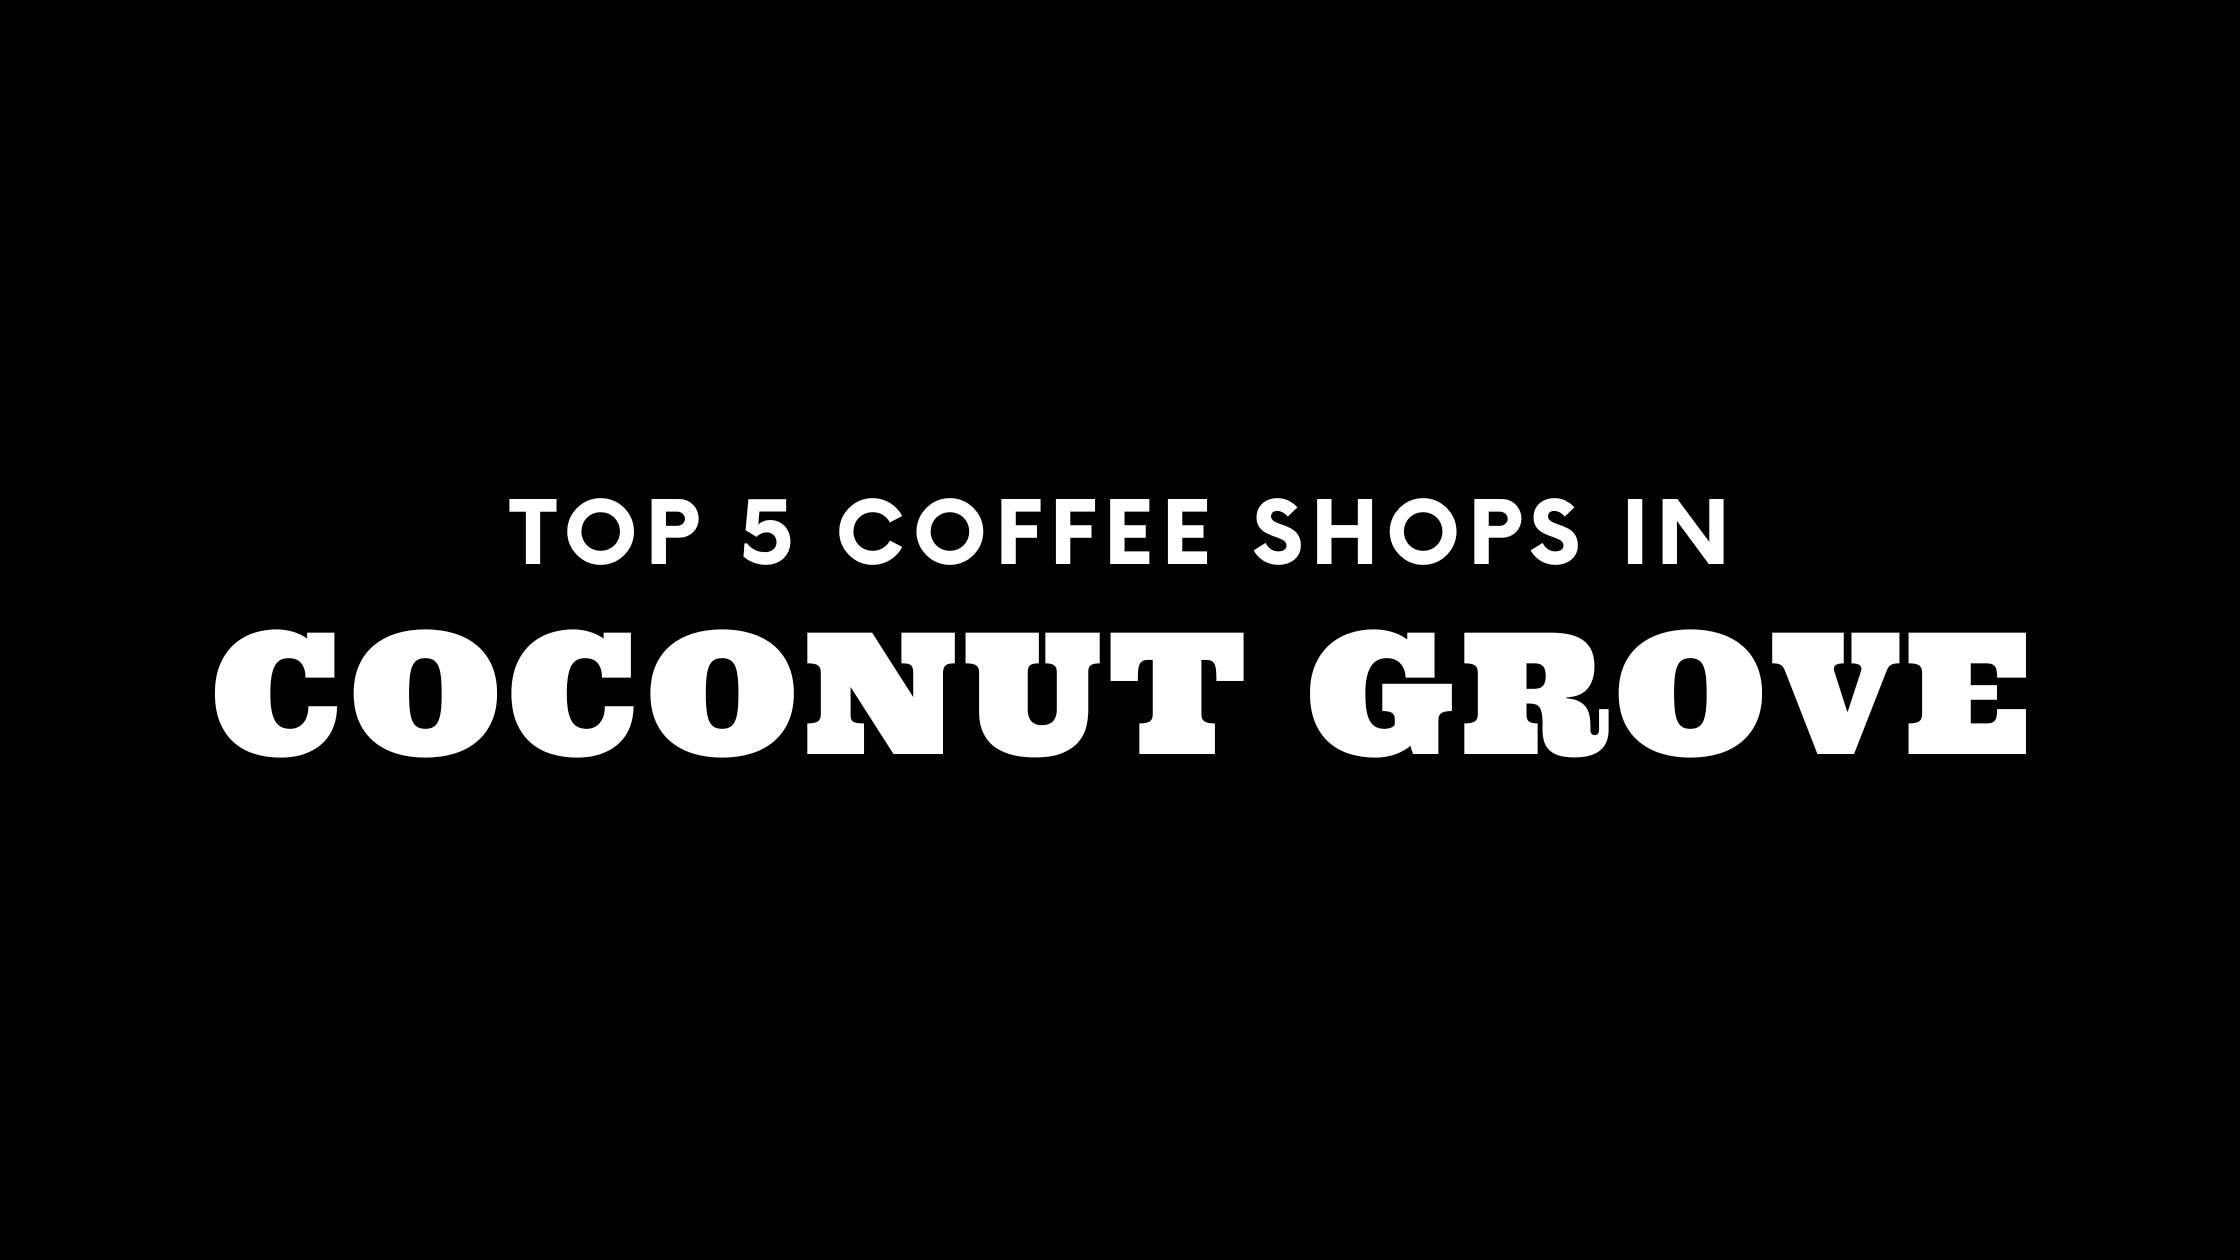 Top 5 Coffee Shops in Coconut Grove